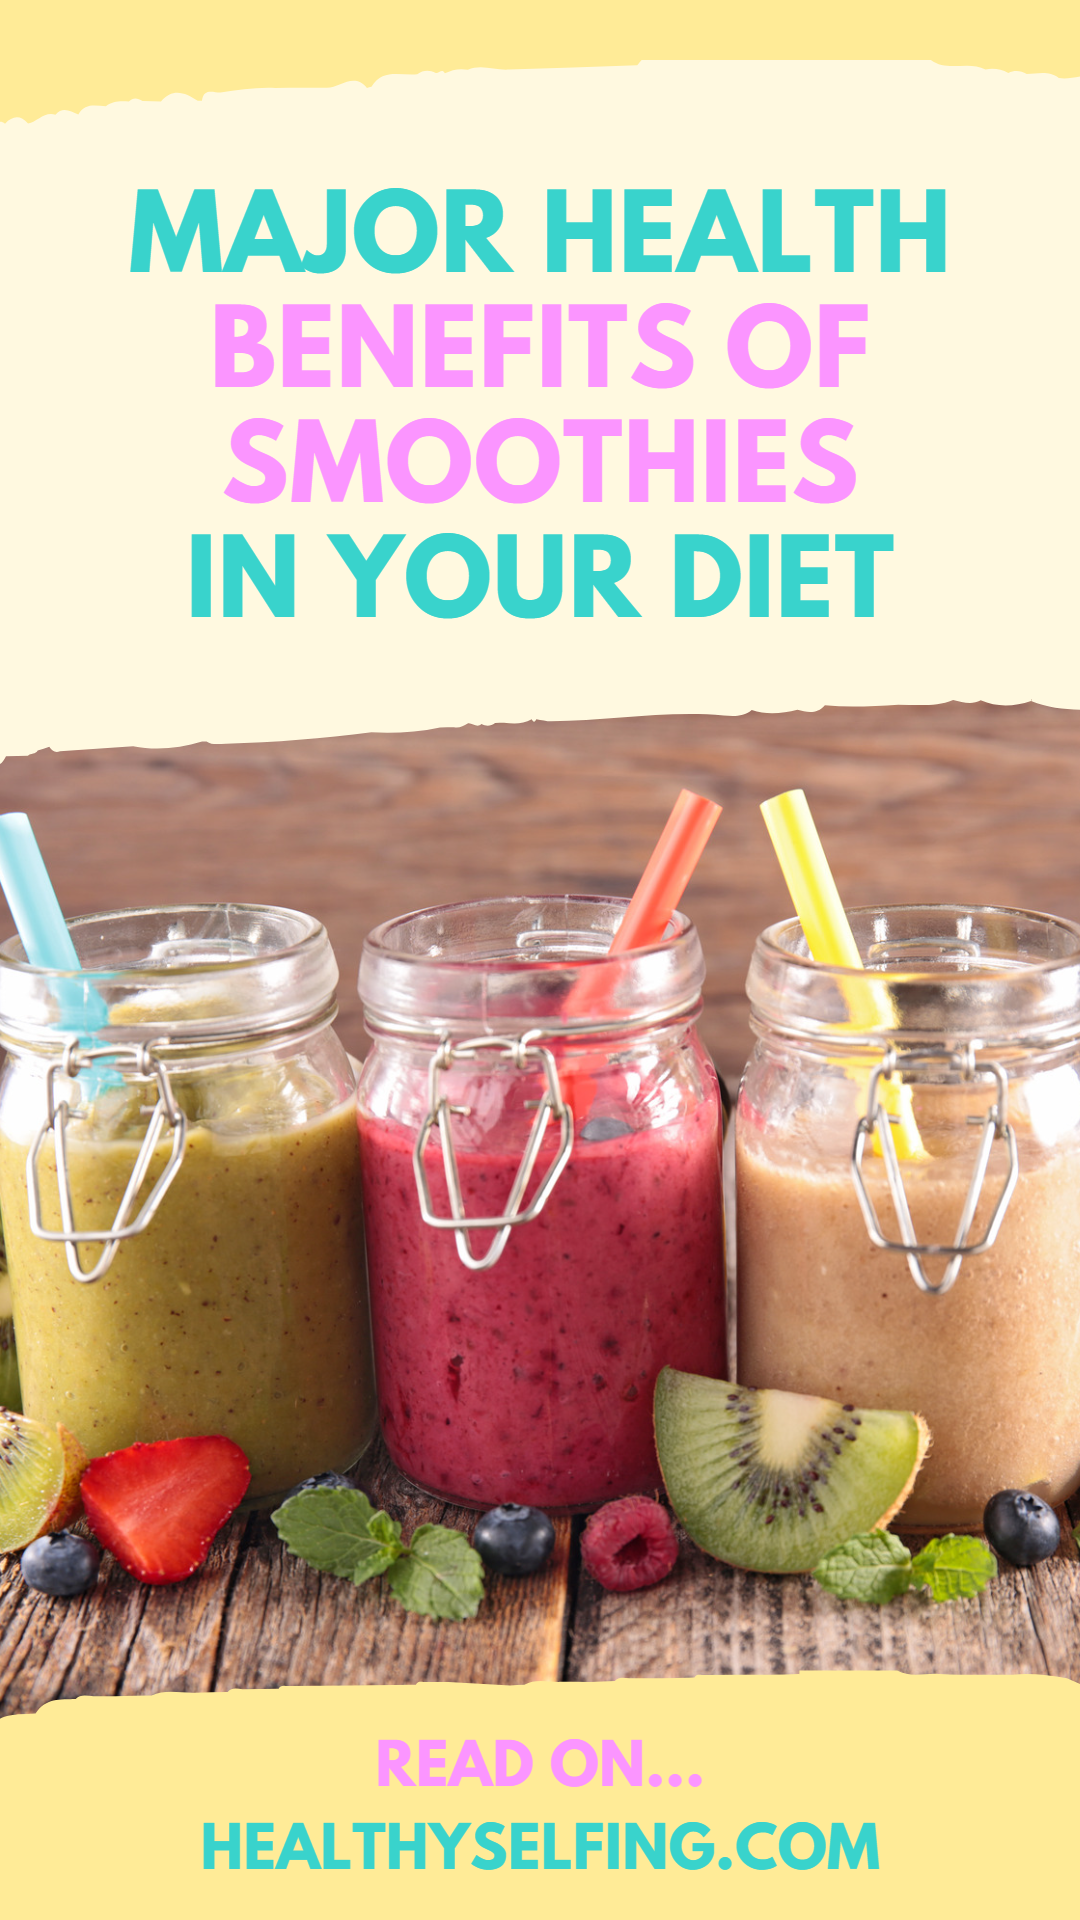 Major Health Benefits of Smoothies in Your Diet